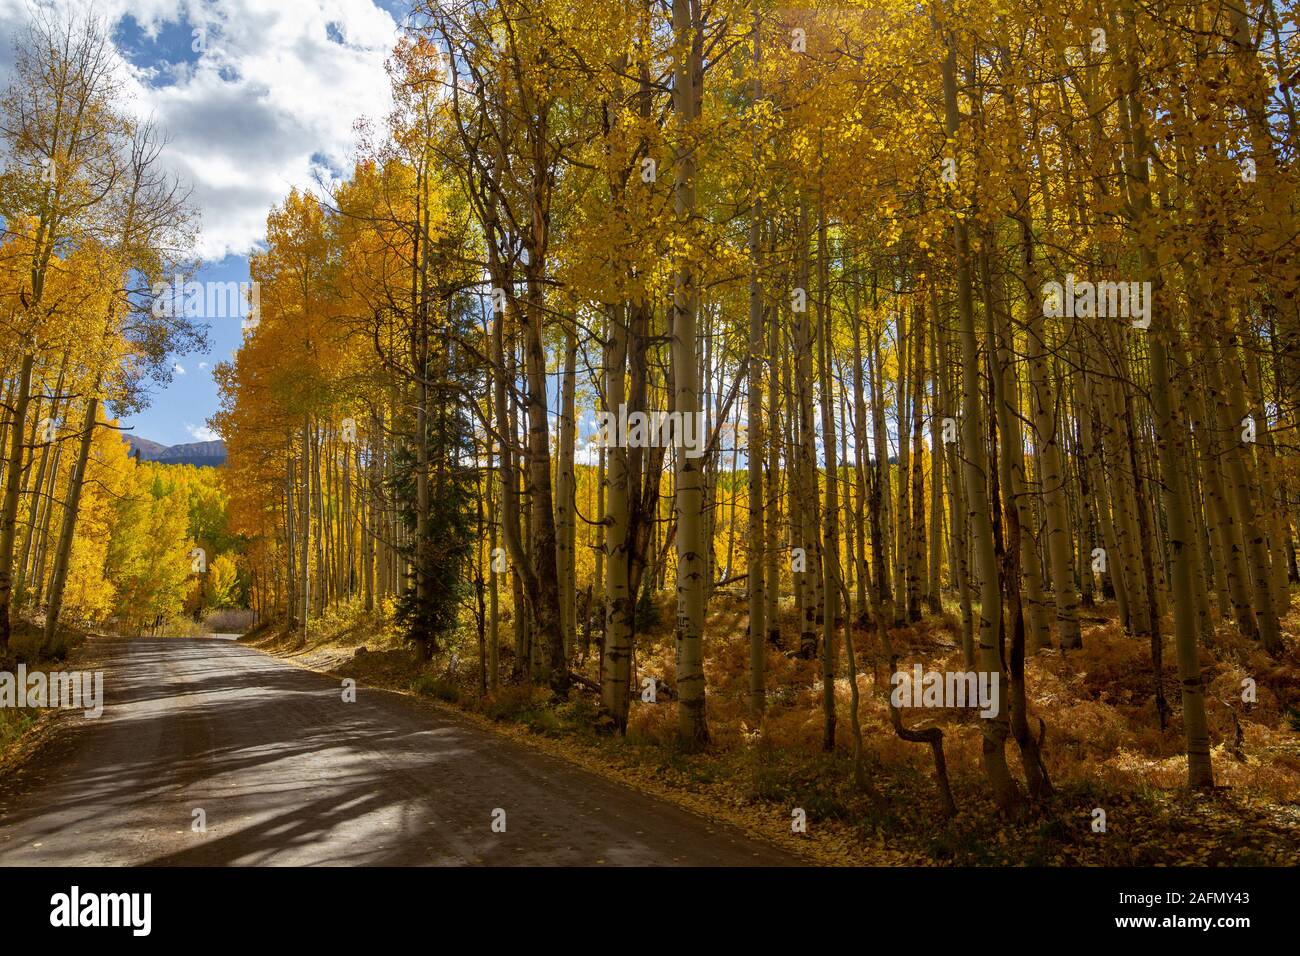 Kebler Pass a high mountain pass that starts in Crested Butte Colorado is a scenic fall color drive featuring golden aspens. Stock Photo